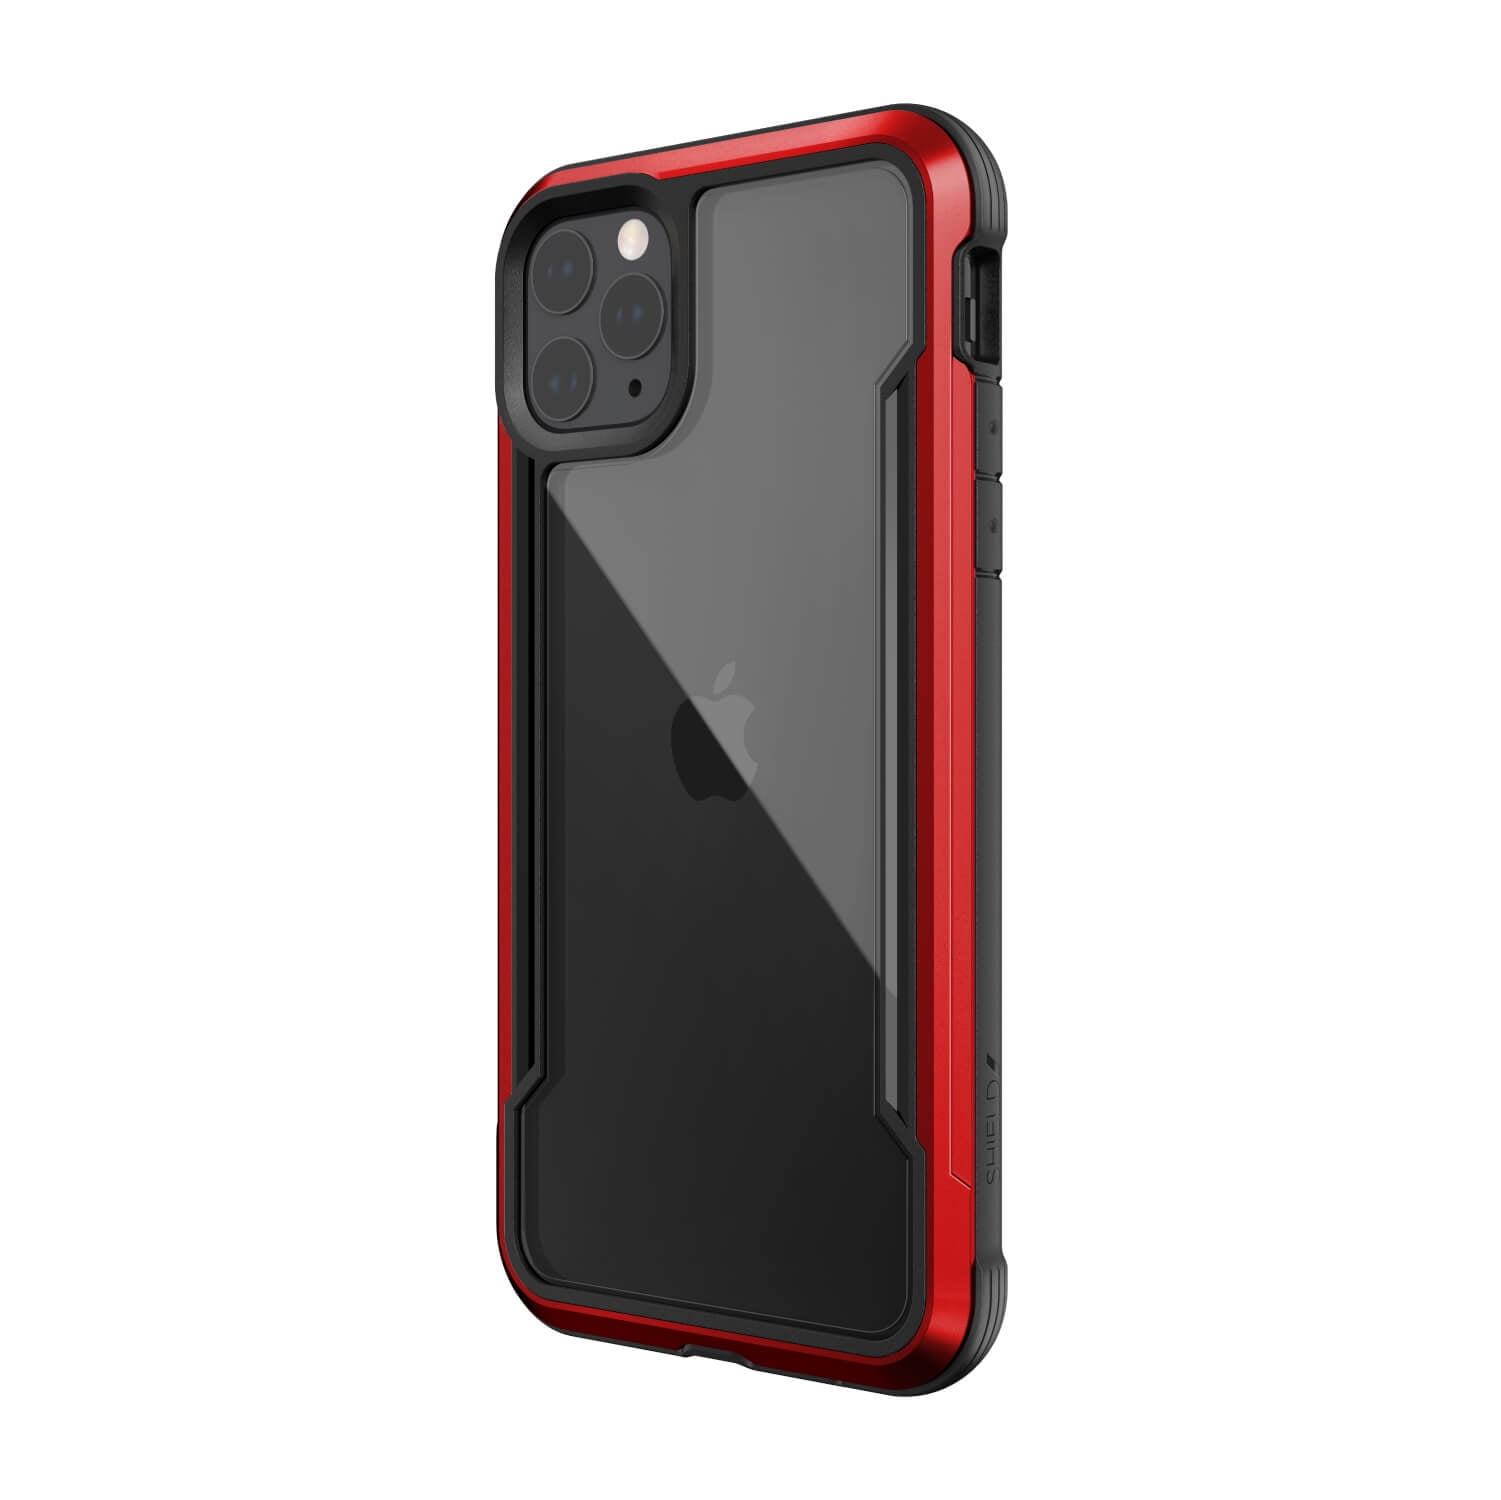 Raptic Shield Case Compatible with iPhone 11 Pro Max Case, Shock Absorbing  Protection, Durable Aluminum Frame, 10ft Drop Tested, Fits iPhone 11 Pro